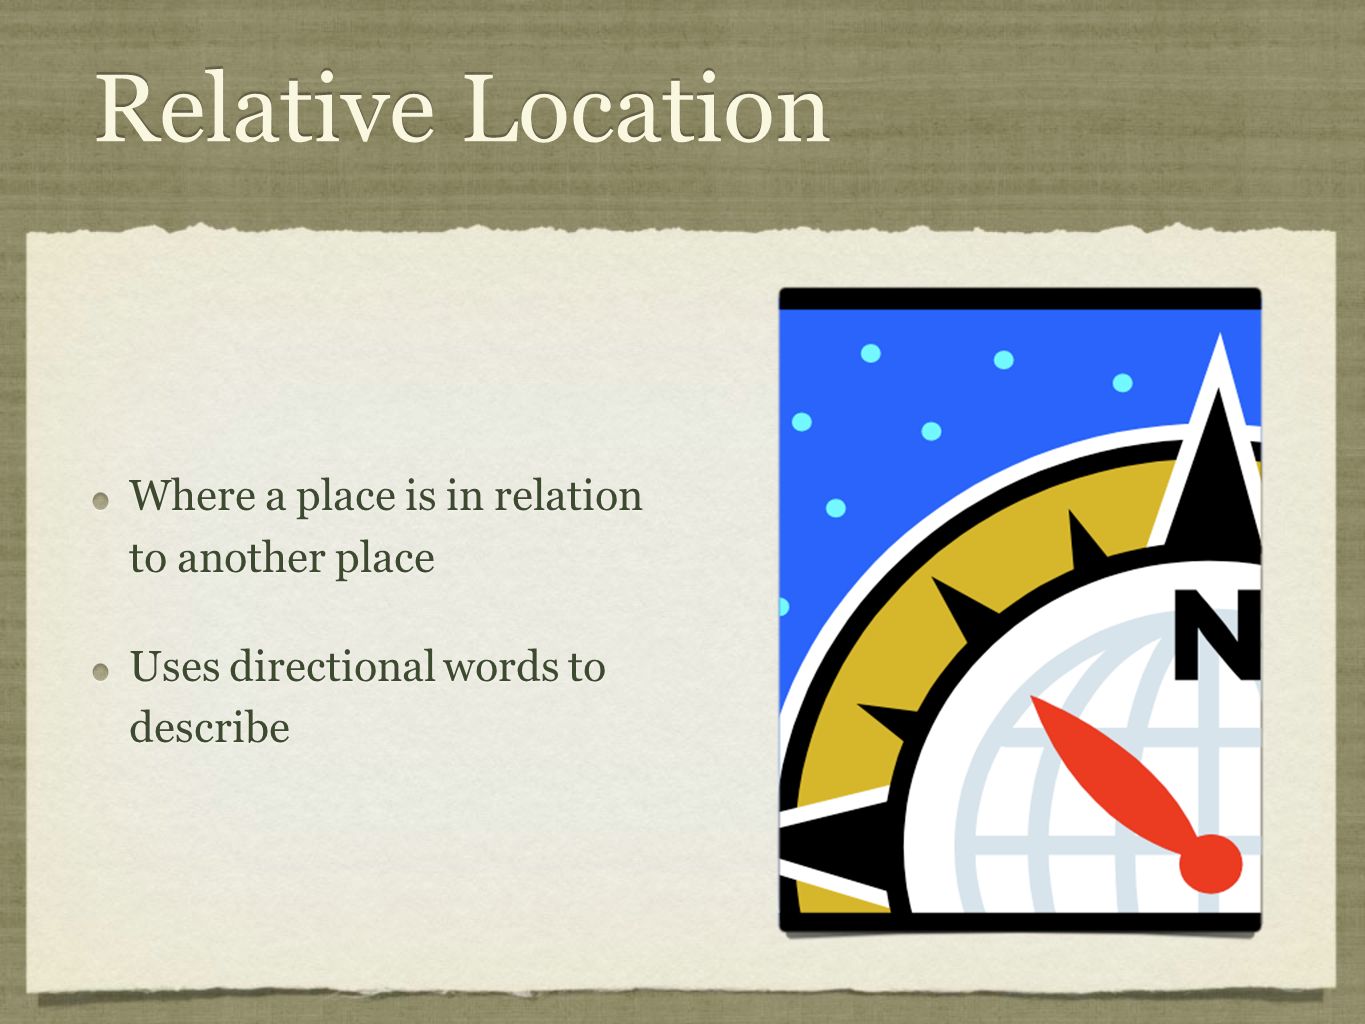 Relative Location Where a place is in relation to another place Uses directional words to describe Where a place is in relation to another place Uses directional words to describe